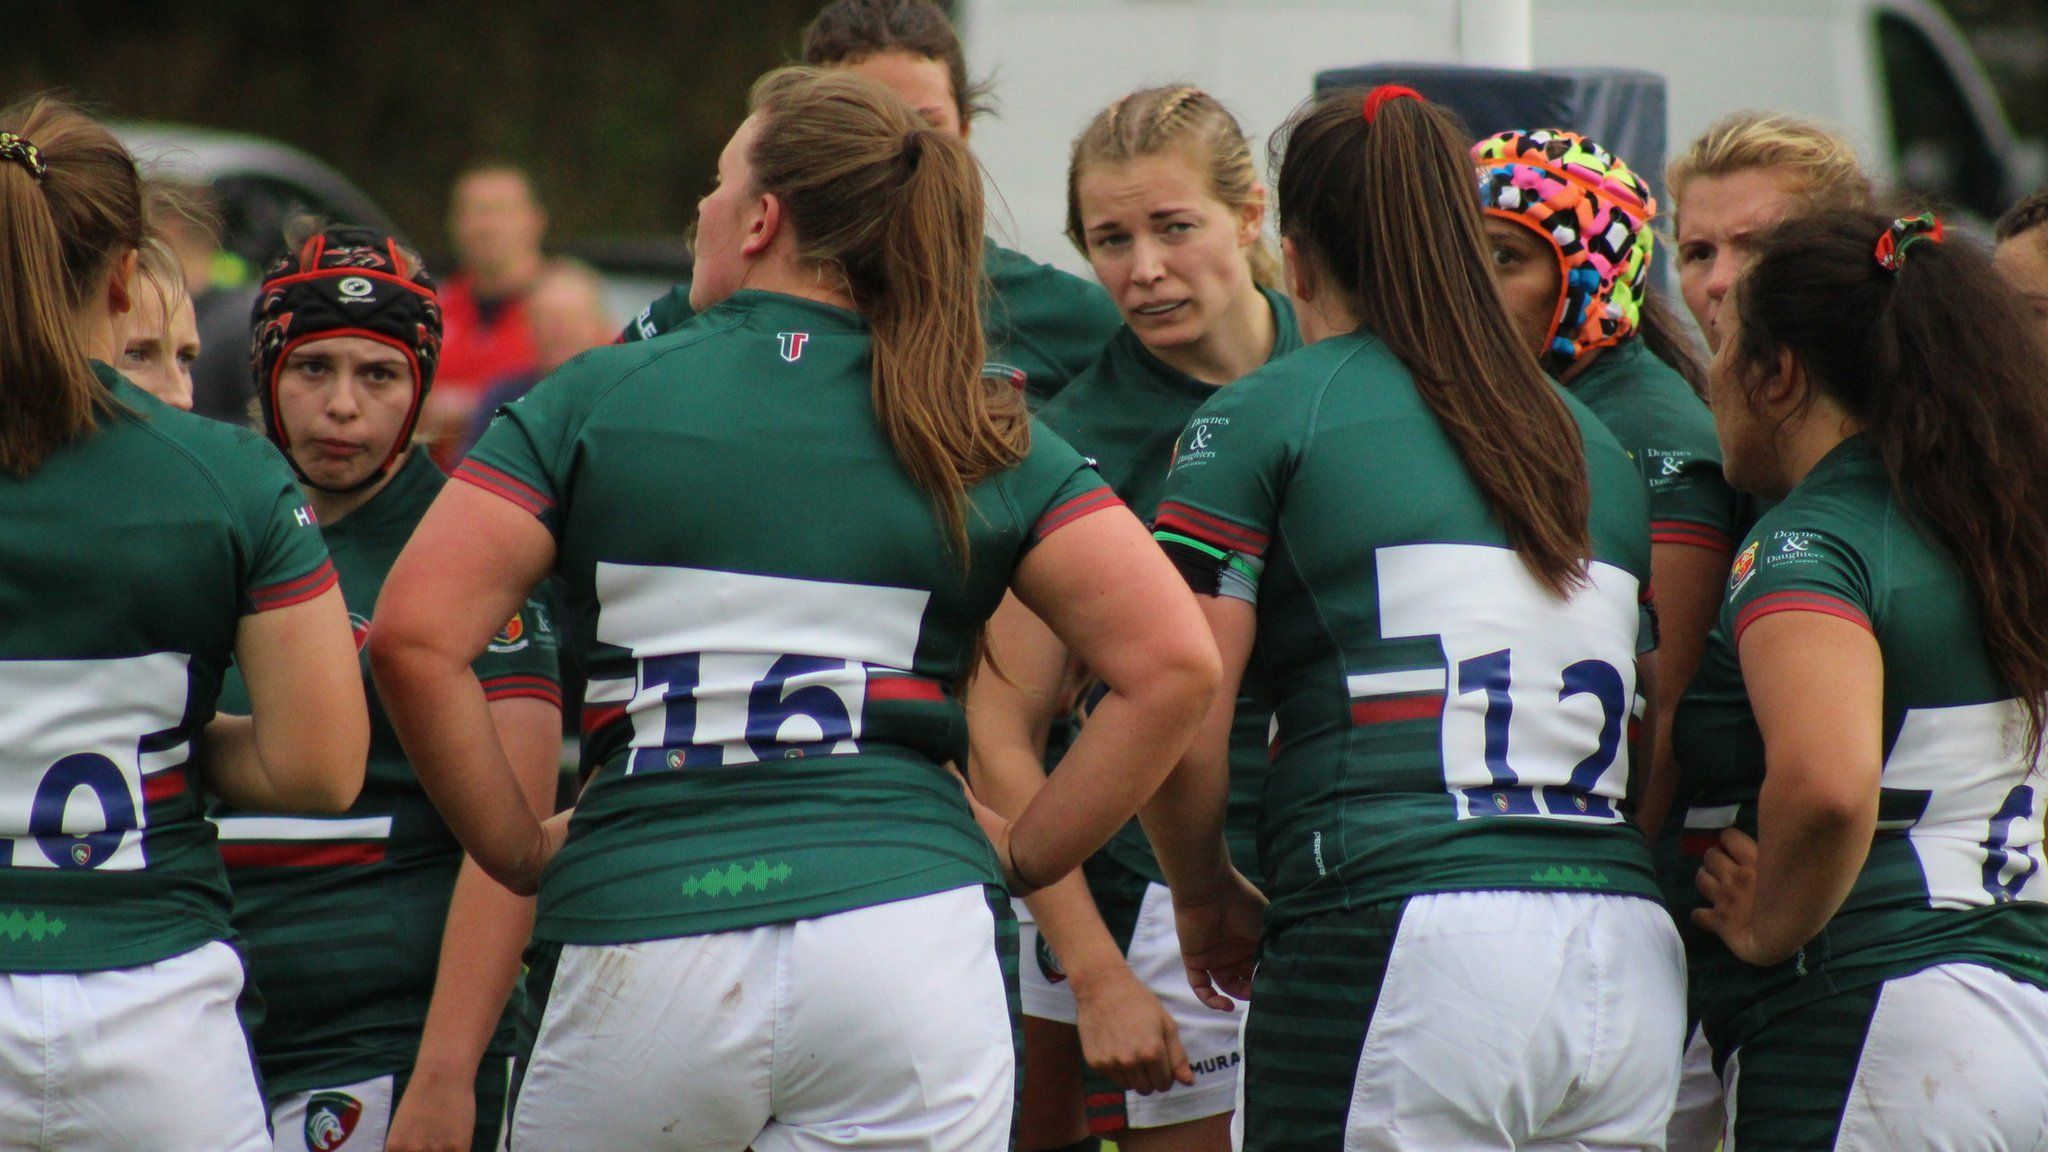 Leicester Tigers women's team